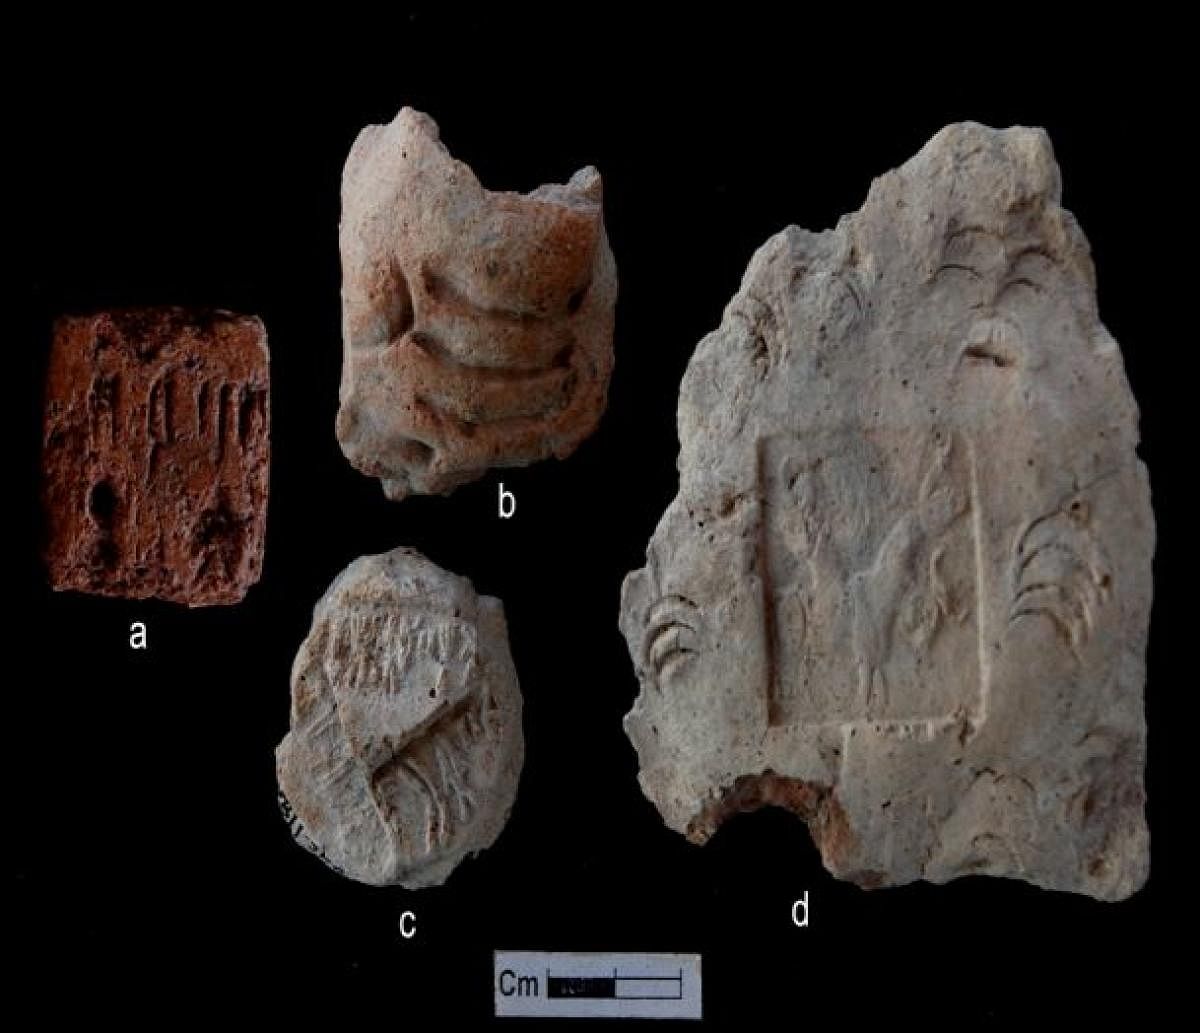 Terracotta-inscribed square tablet and terracotta sealings with inscribed seal impressions from Shikara, Gujarat